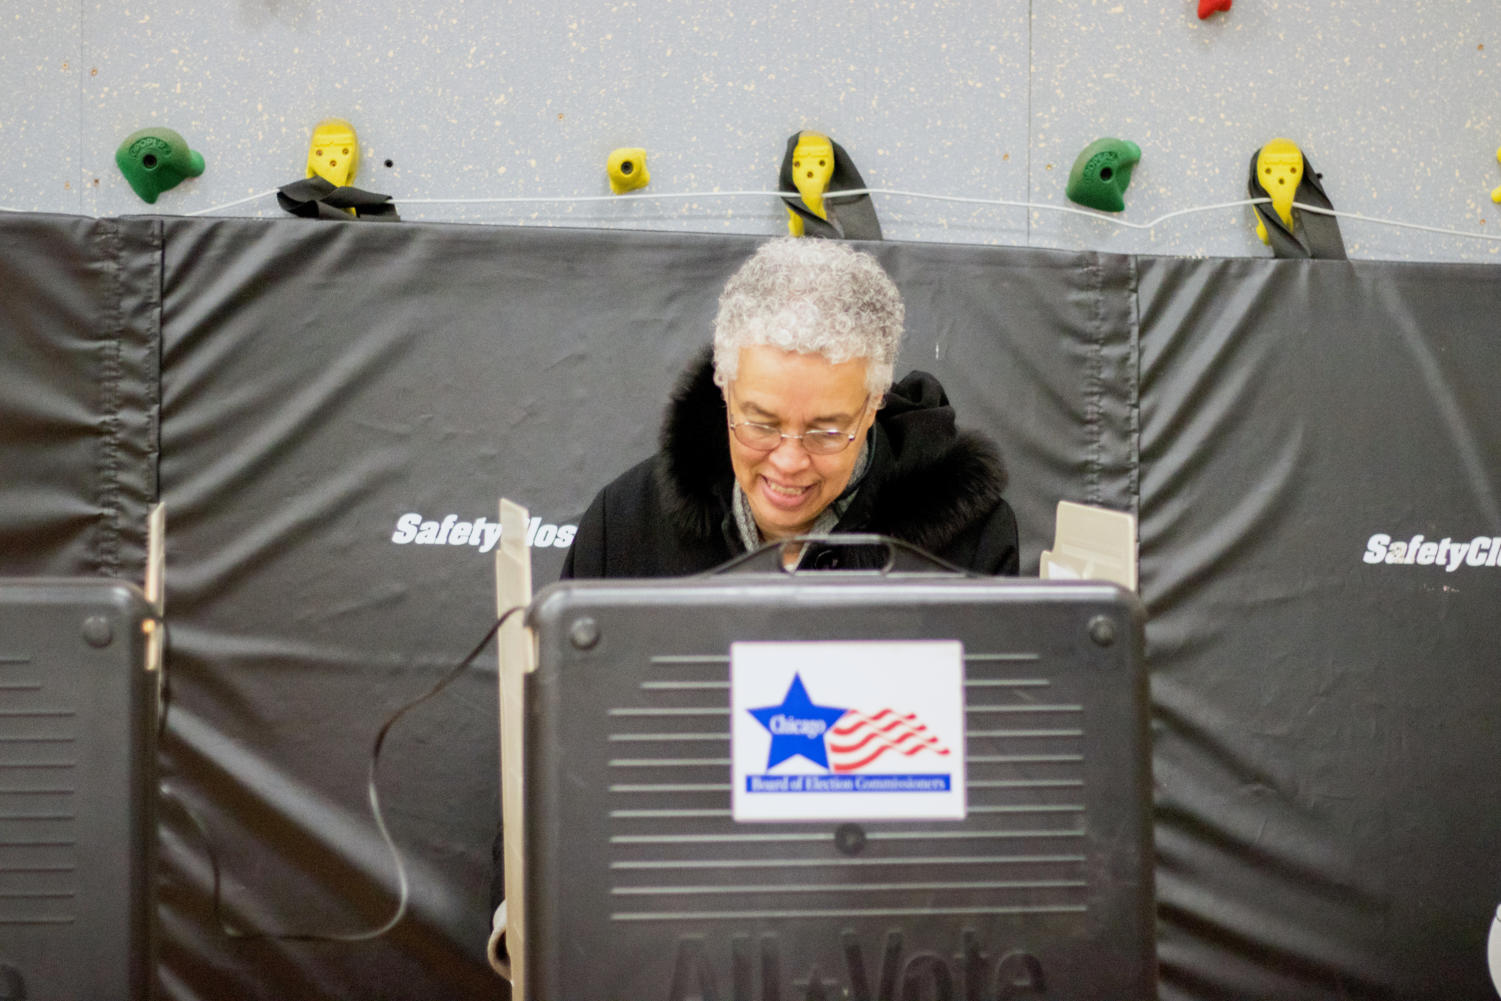 Toni Preckwinkle, who will face Lori Lightfoot in a runoff, cast her vote near campus on Tuesday morning.